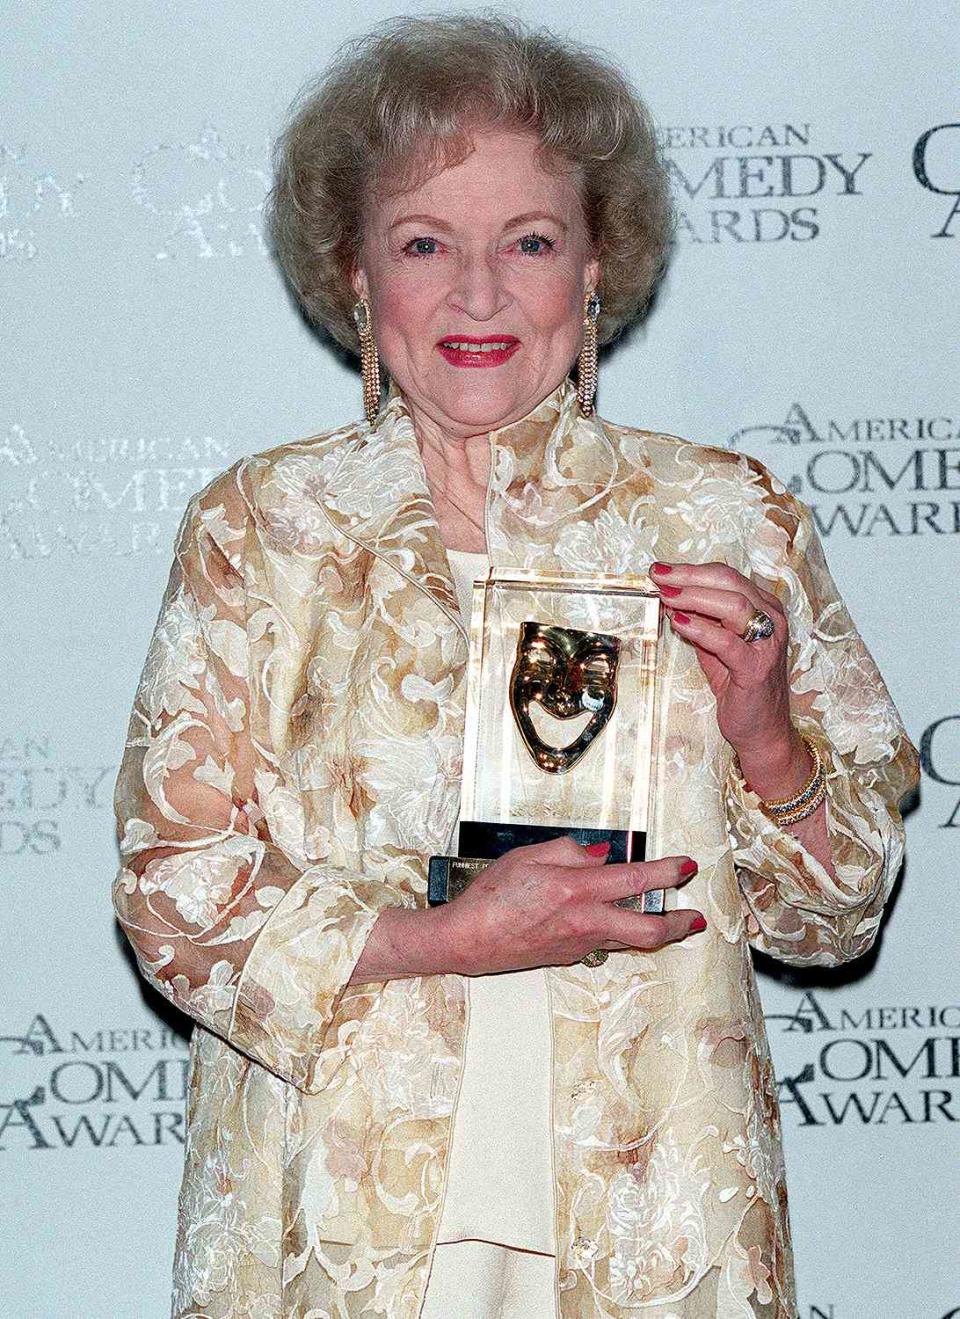 <p>On top of her seven Emmy wins and two SAG Awards, White also had two American Comedy Awards and was the recipient of lifetime achievement awards at the Emmys in 2015, the SAG Awards in 2010 and the American Comedy Awards in 1990. </p>